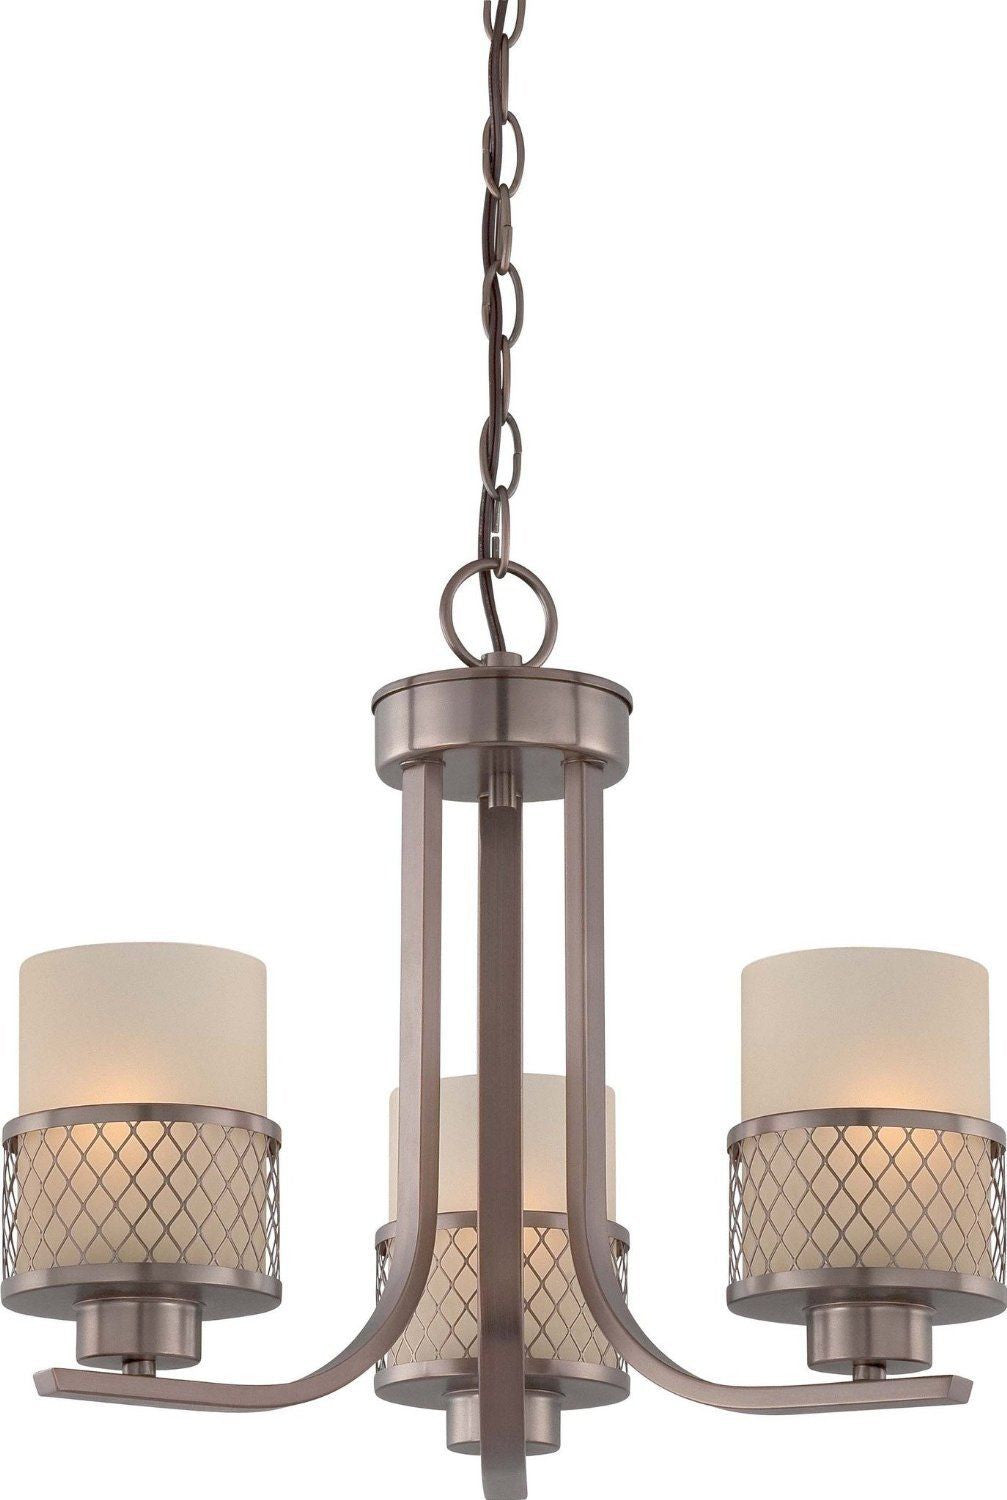 Nuvo Lighting 60-4787 Fusion Collection Three Light Hanging Chandelier in Hazel Bronze Finish